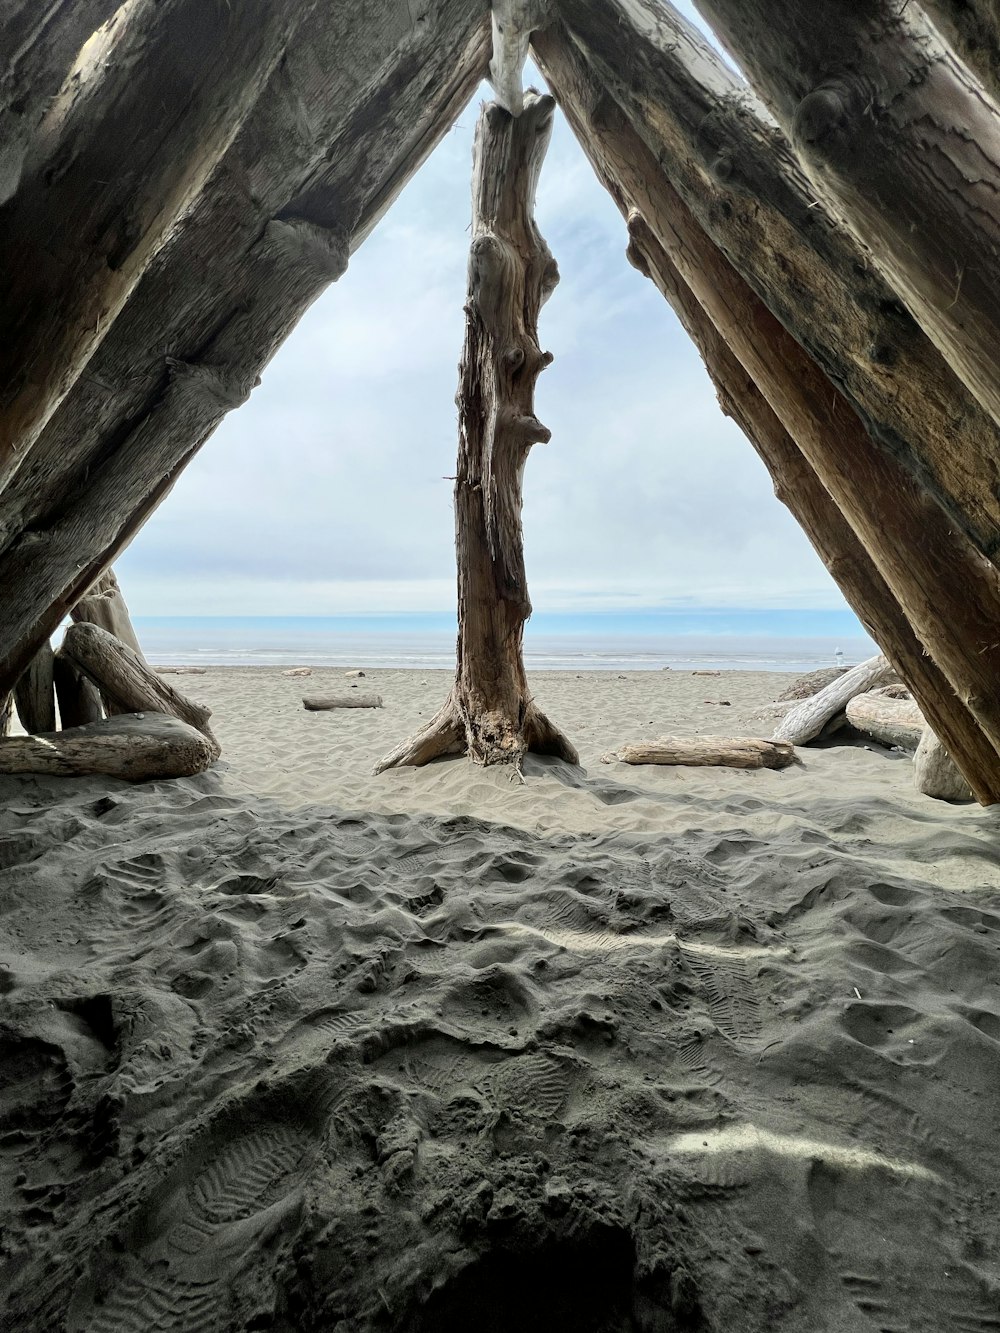 a view of a beach through a wooden structure